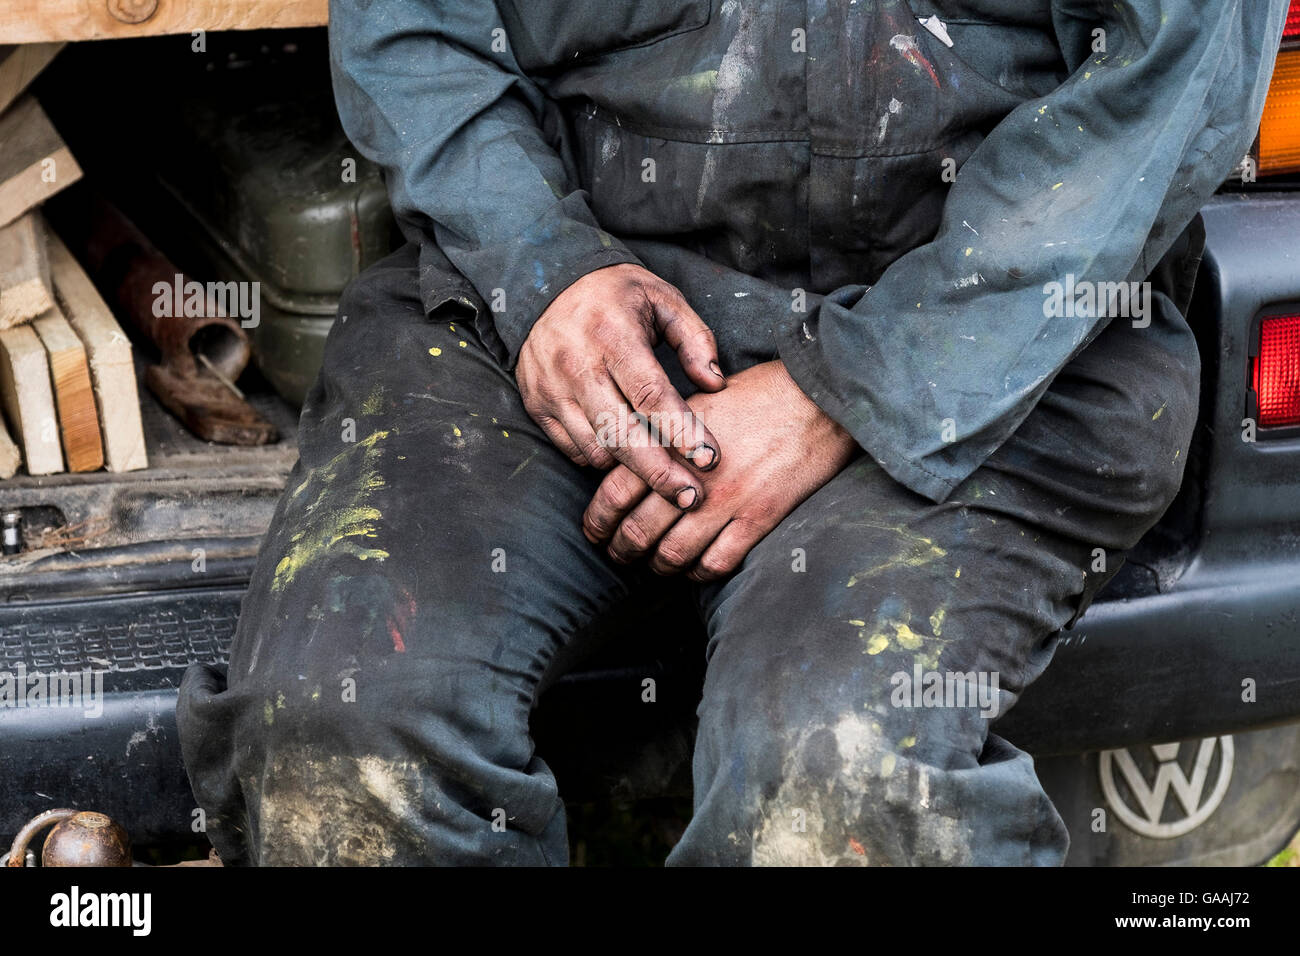 The oil covered hands and dirty overalls of a manual worker. Stock Photo